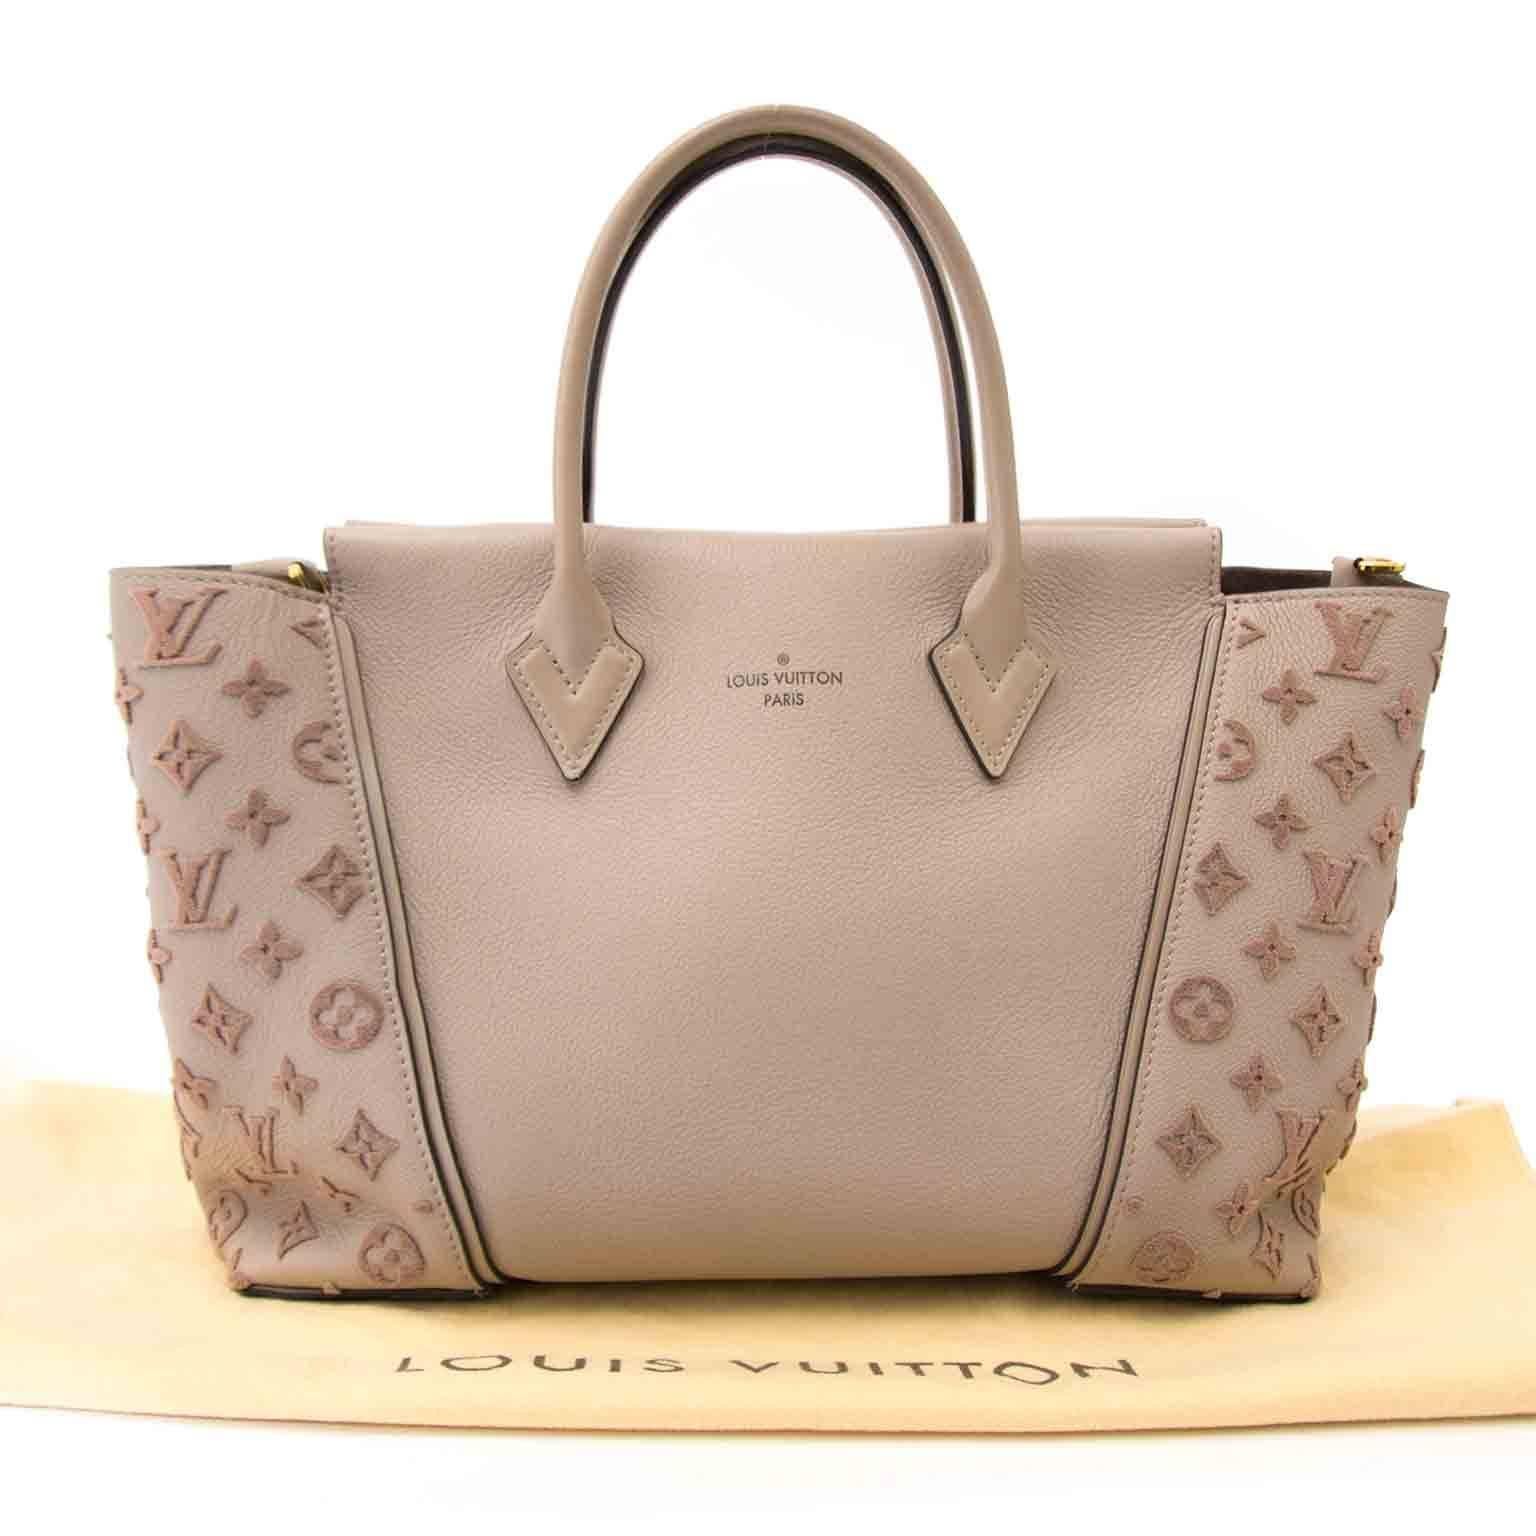 excellent preloved

est retail price €3200,-

Louis Vuitton Veau Cachemire Tote W PM Galet

The Louis Vuitton W Bag gets its name from the unique ‘W’ design of the bag, created by using two separate materials. The expansive sides of flocked monogram